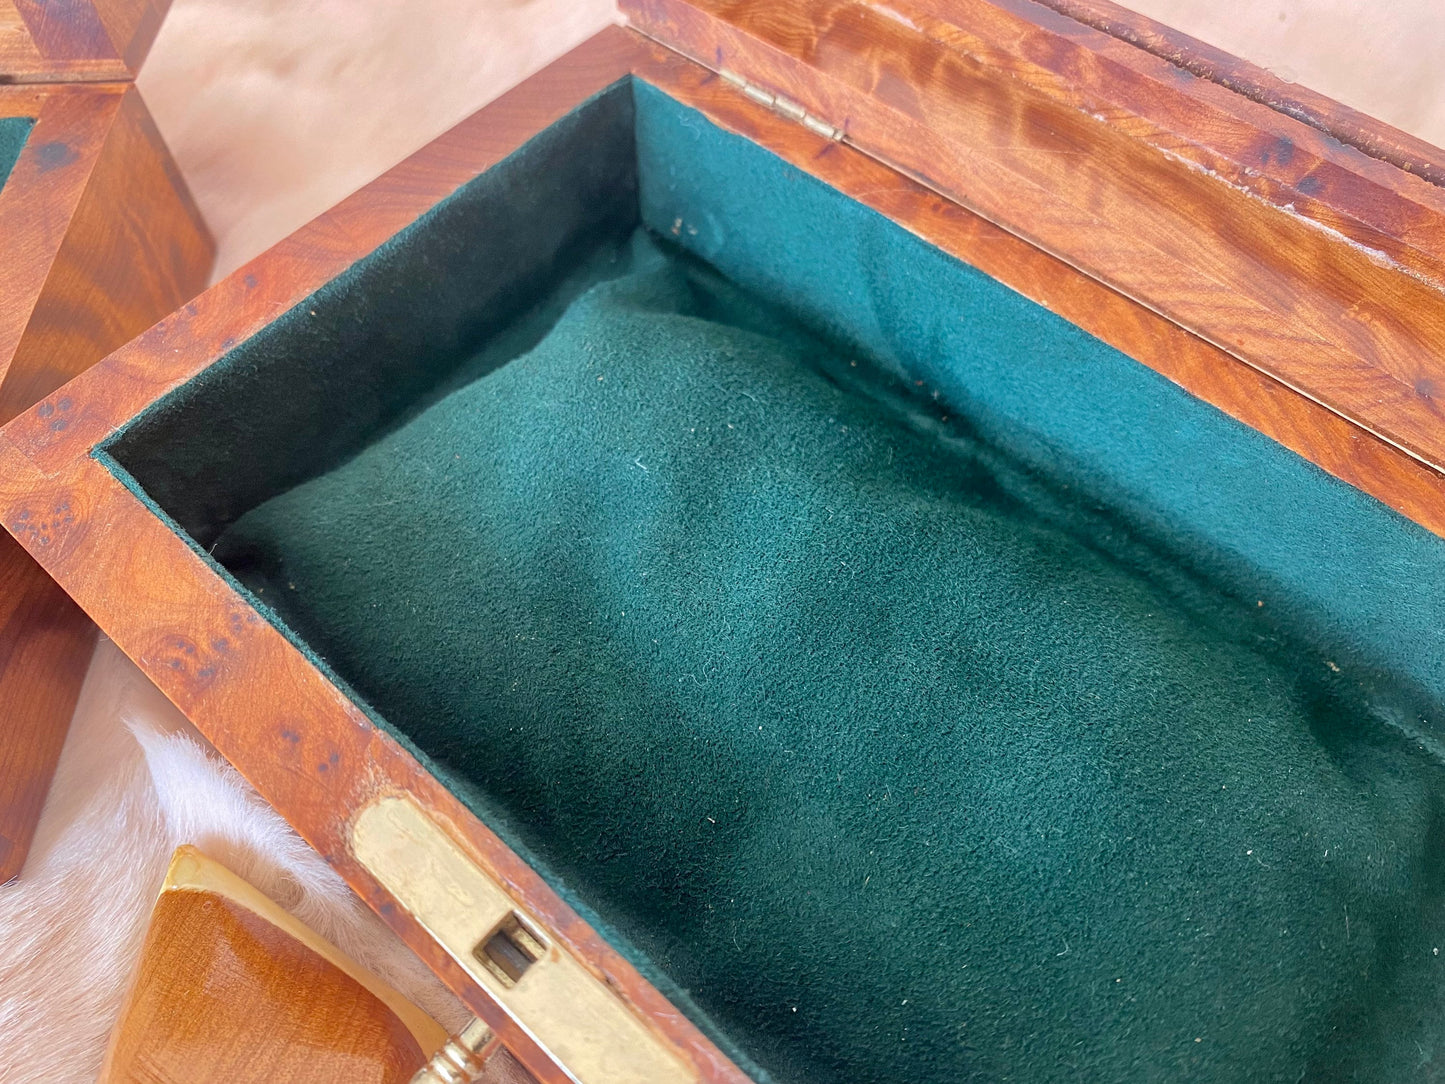 6"x4" Luxury Handcrafted Thuya Wood Watch Box with Glass Top Box with Green Suede Lining, sunglass storage wooden box,long-lasting watch box